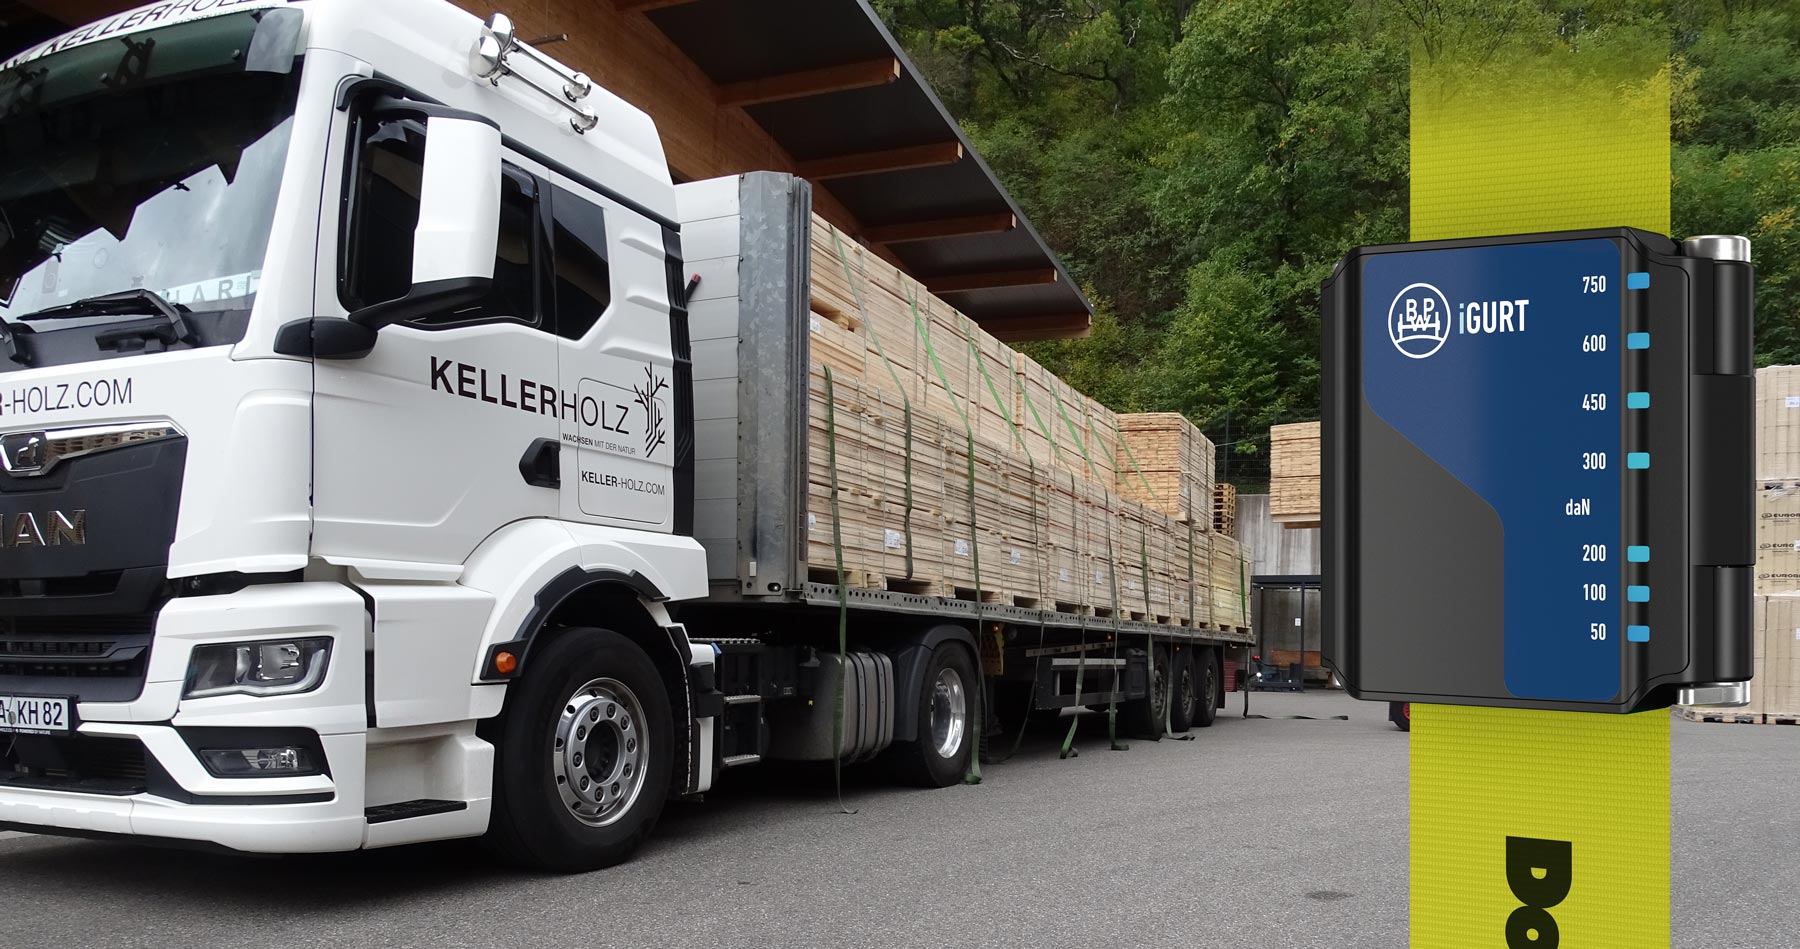 The KELLERHOLZ sawmill delivers to its customers just in time